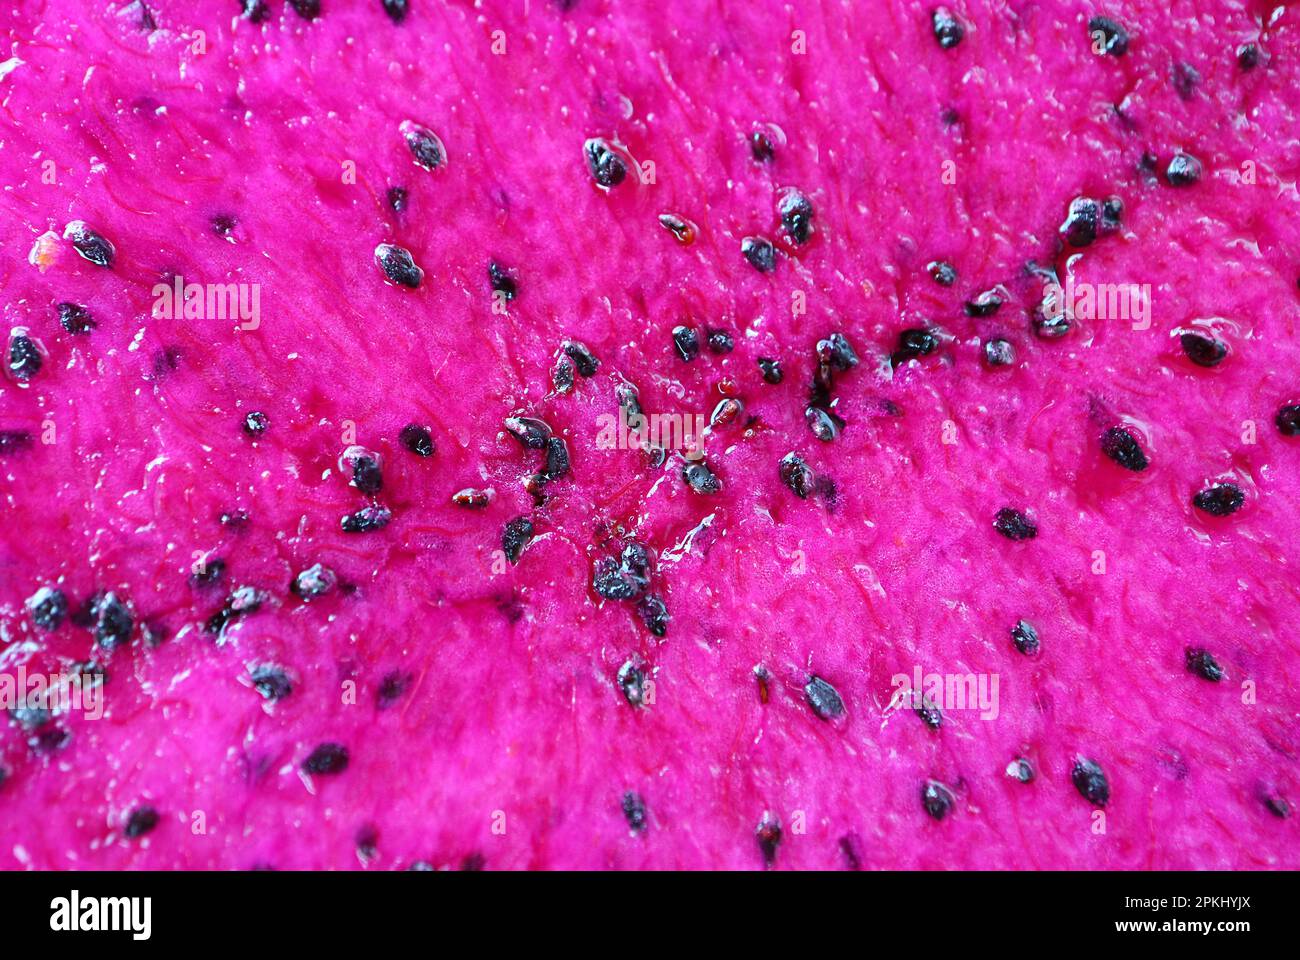 Eye Catching Hot Pink Juicy Flesh and Crunchy Black Seeds of Red Dragon Fruit Stock Photo